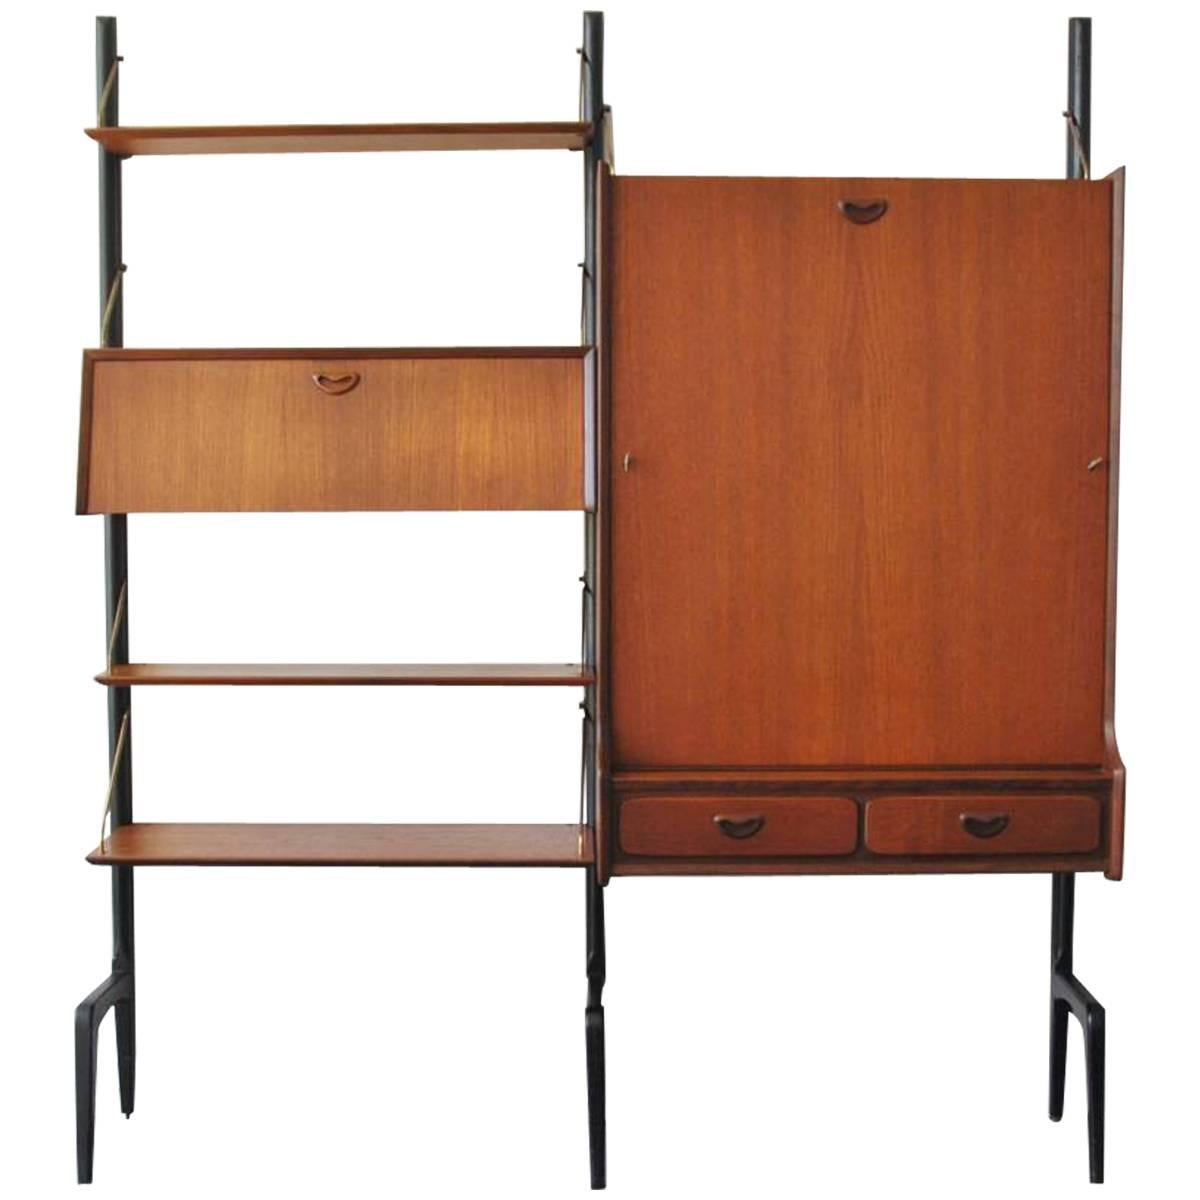 Wall Unit in Teak with Foldable Table by Louis Van Teeffelen for Wébé, 1950s